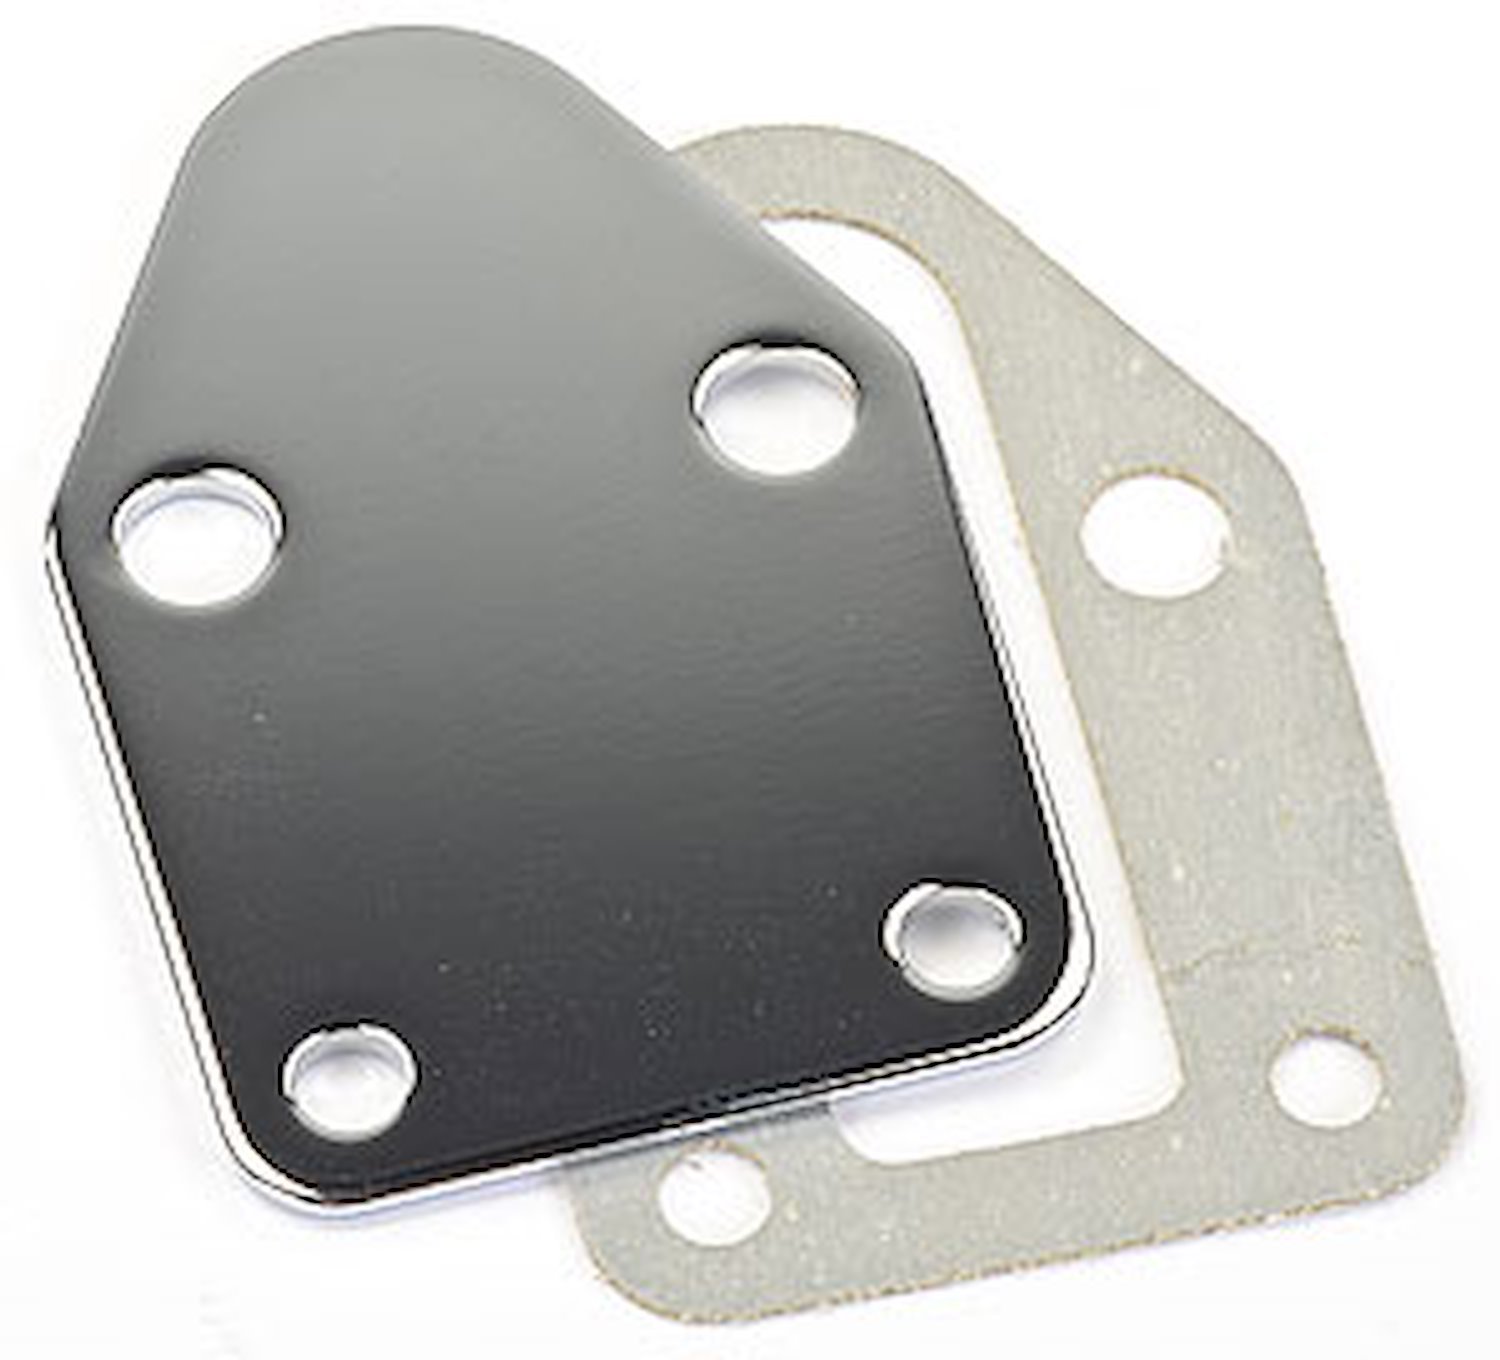 Chrome Fuel Pump Block Off Plate for Small Block Chevy